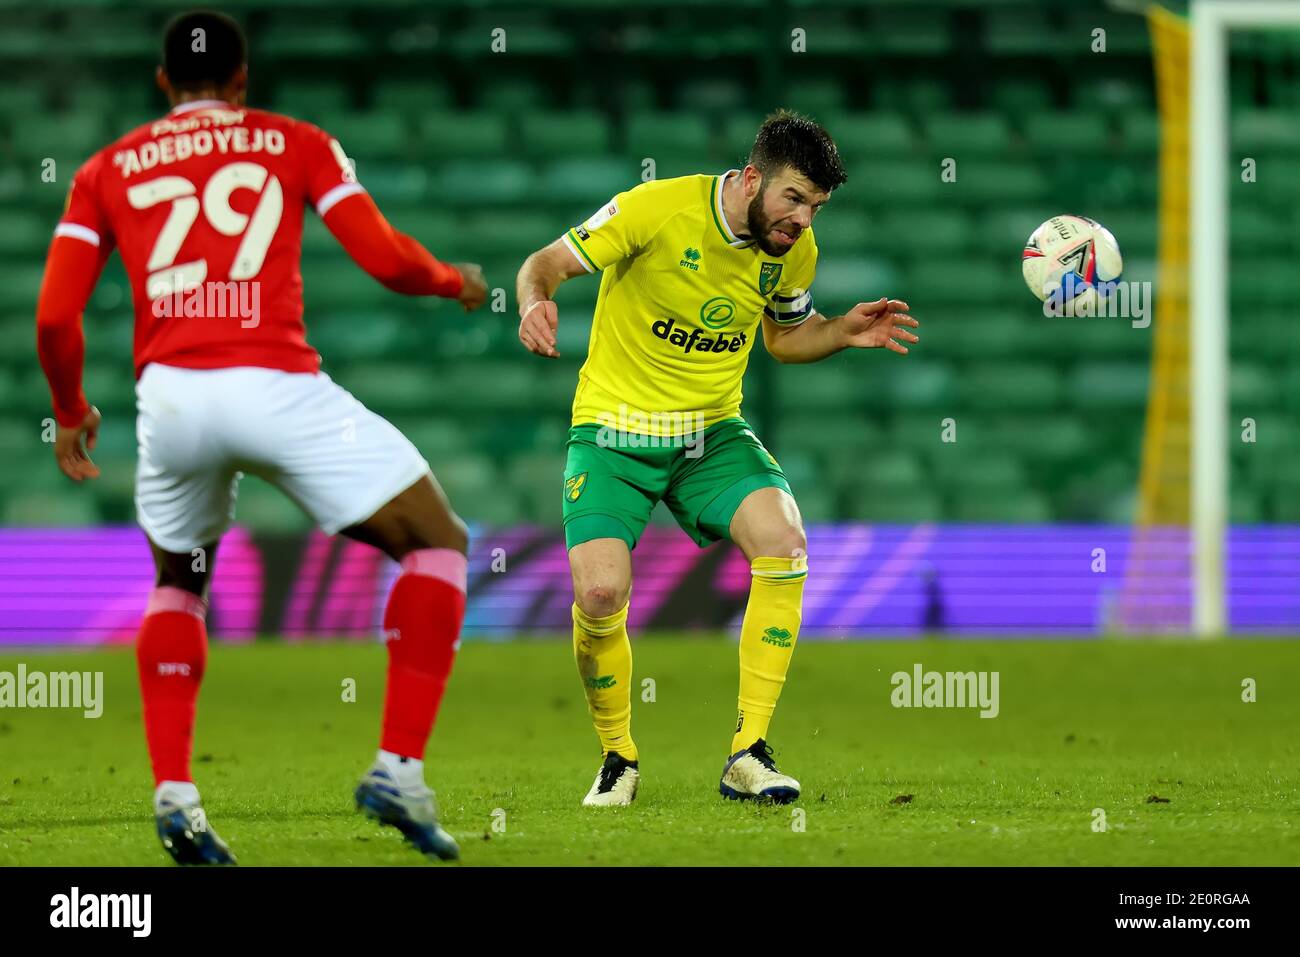 2nd January 2021; Carrow Road, Norwich, Norfolk, England, English Football League Championship Football, Norwich versus Barnsley; Grant Hanley of Norwich City careful as he heads the ball after suffering a head injury Stock Photo